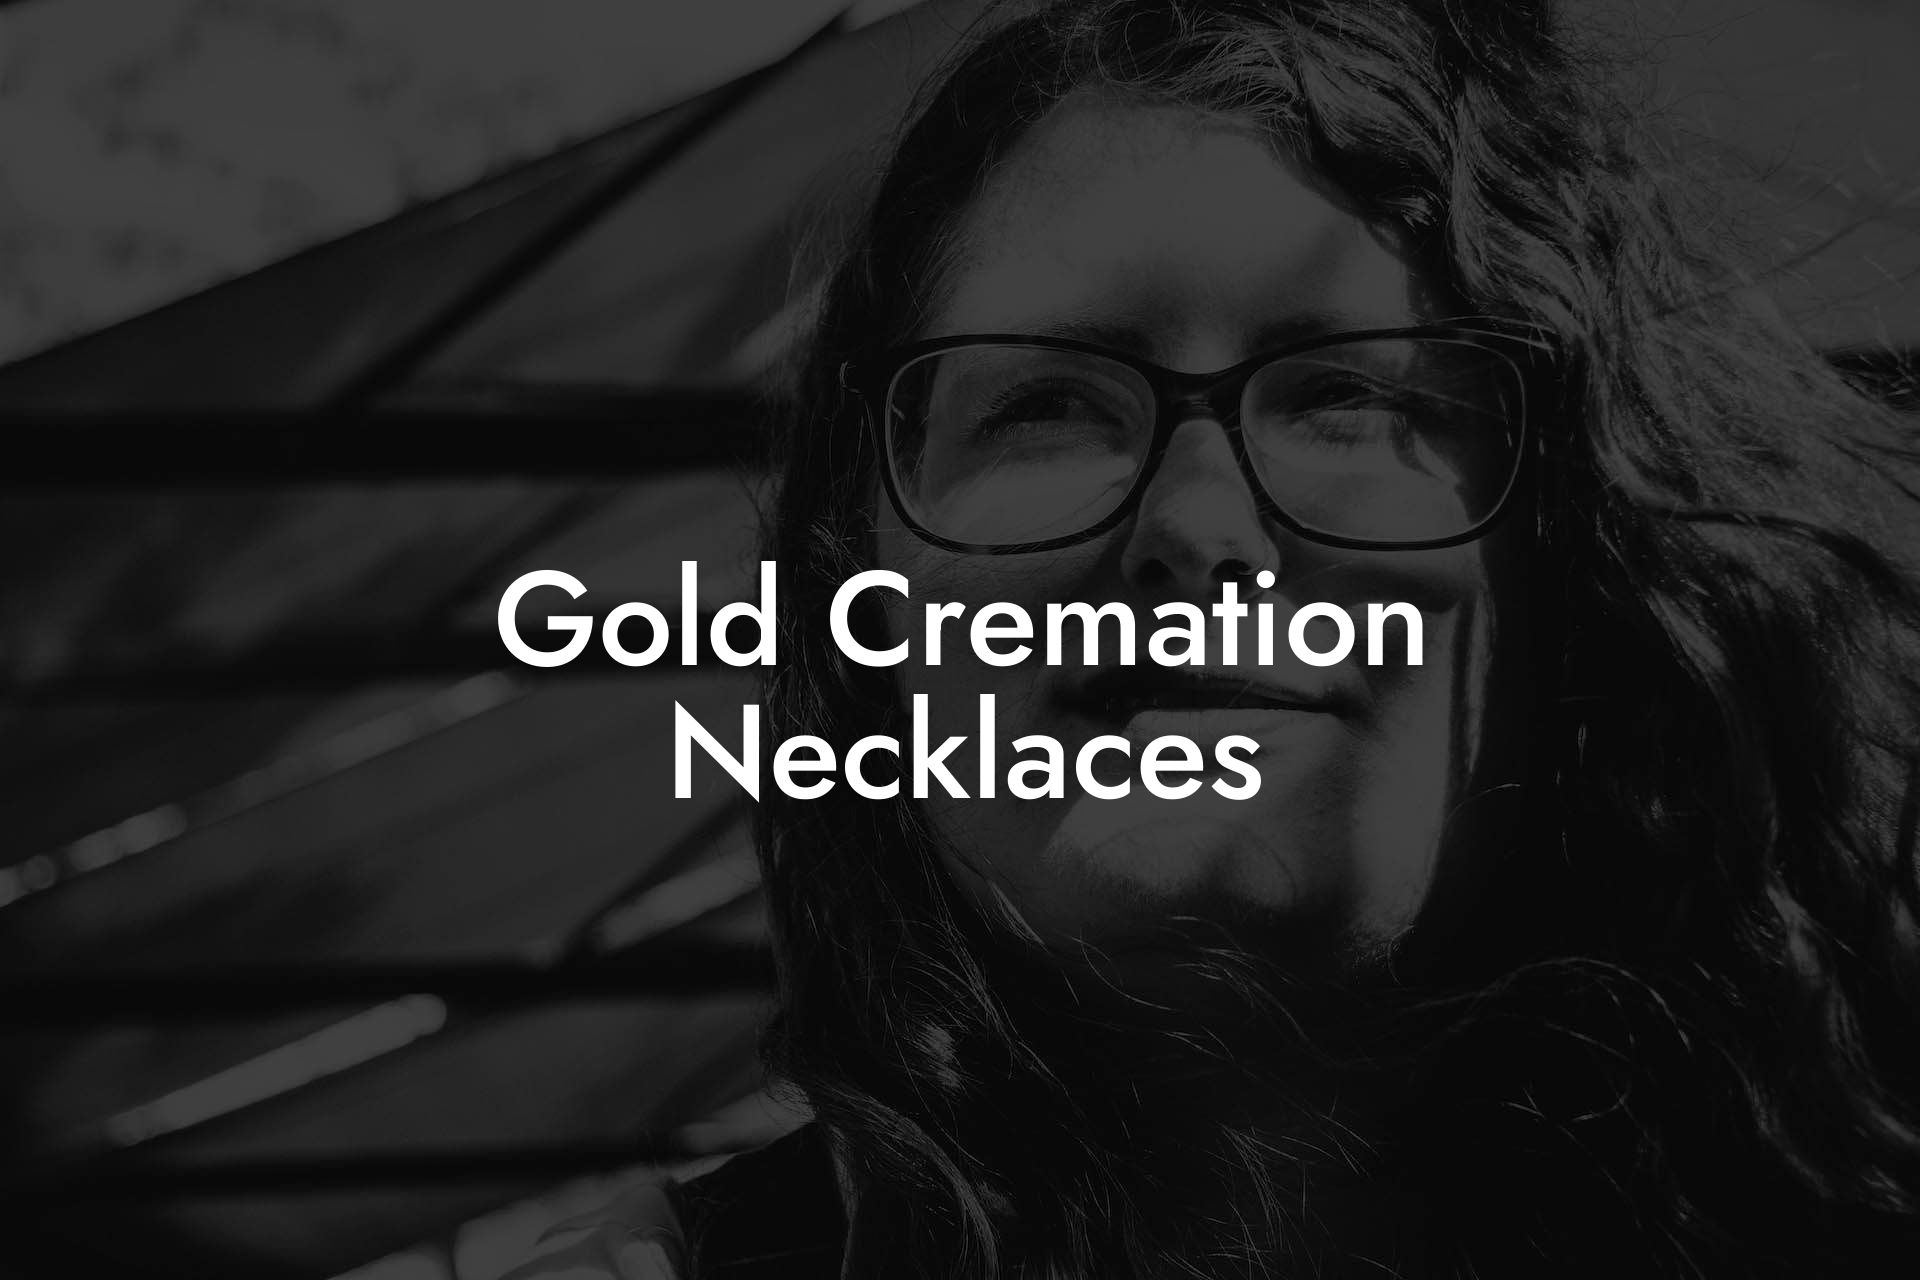 Gold Cremation Necklaces